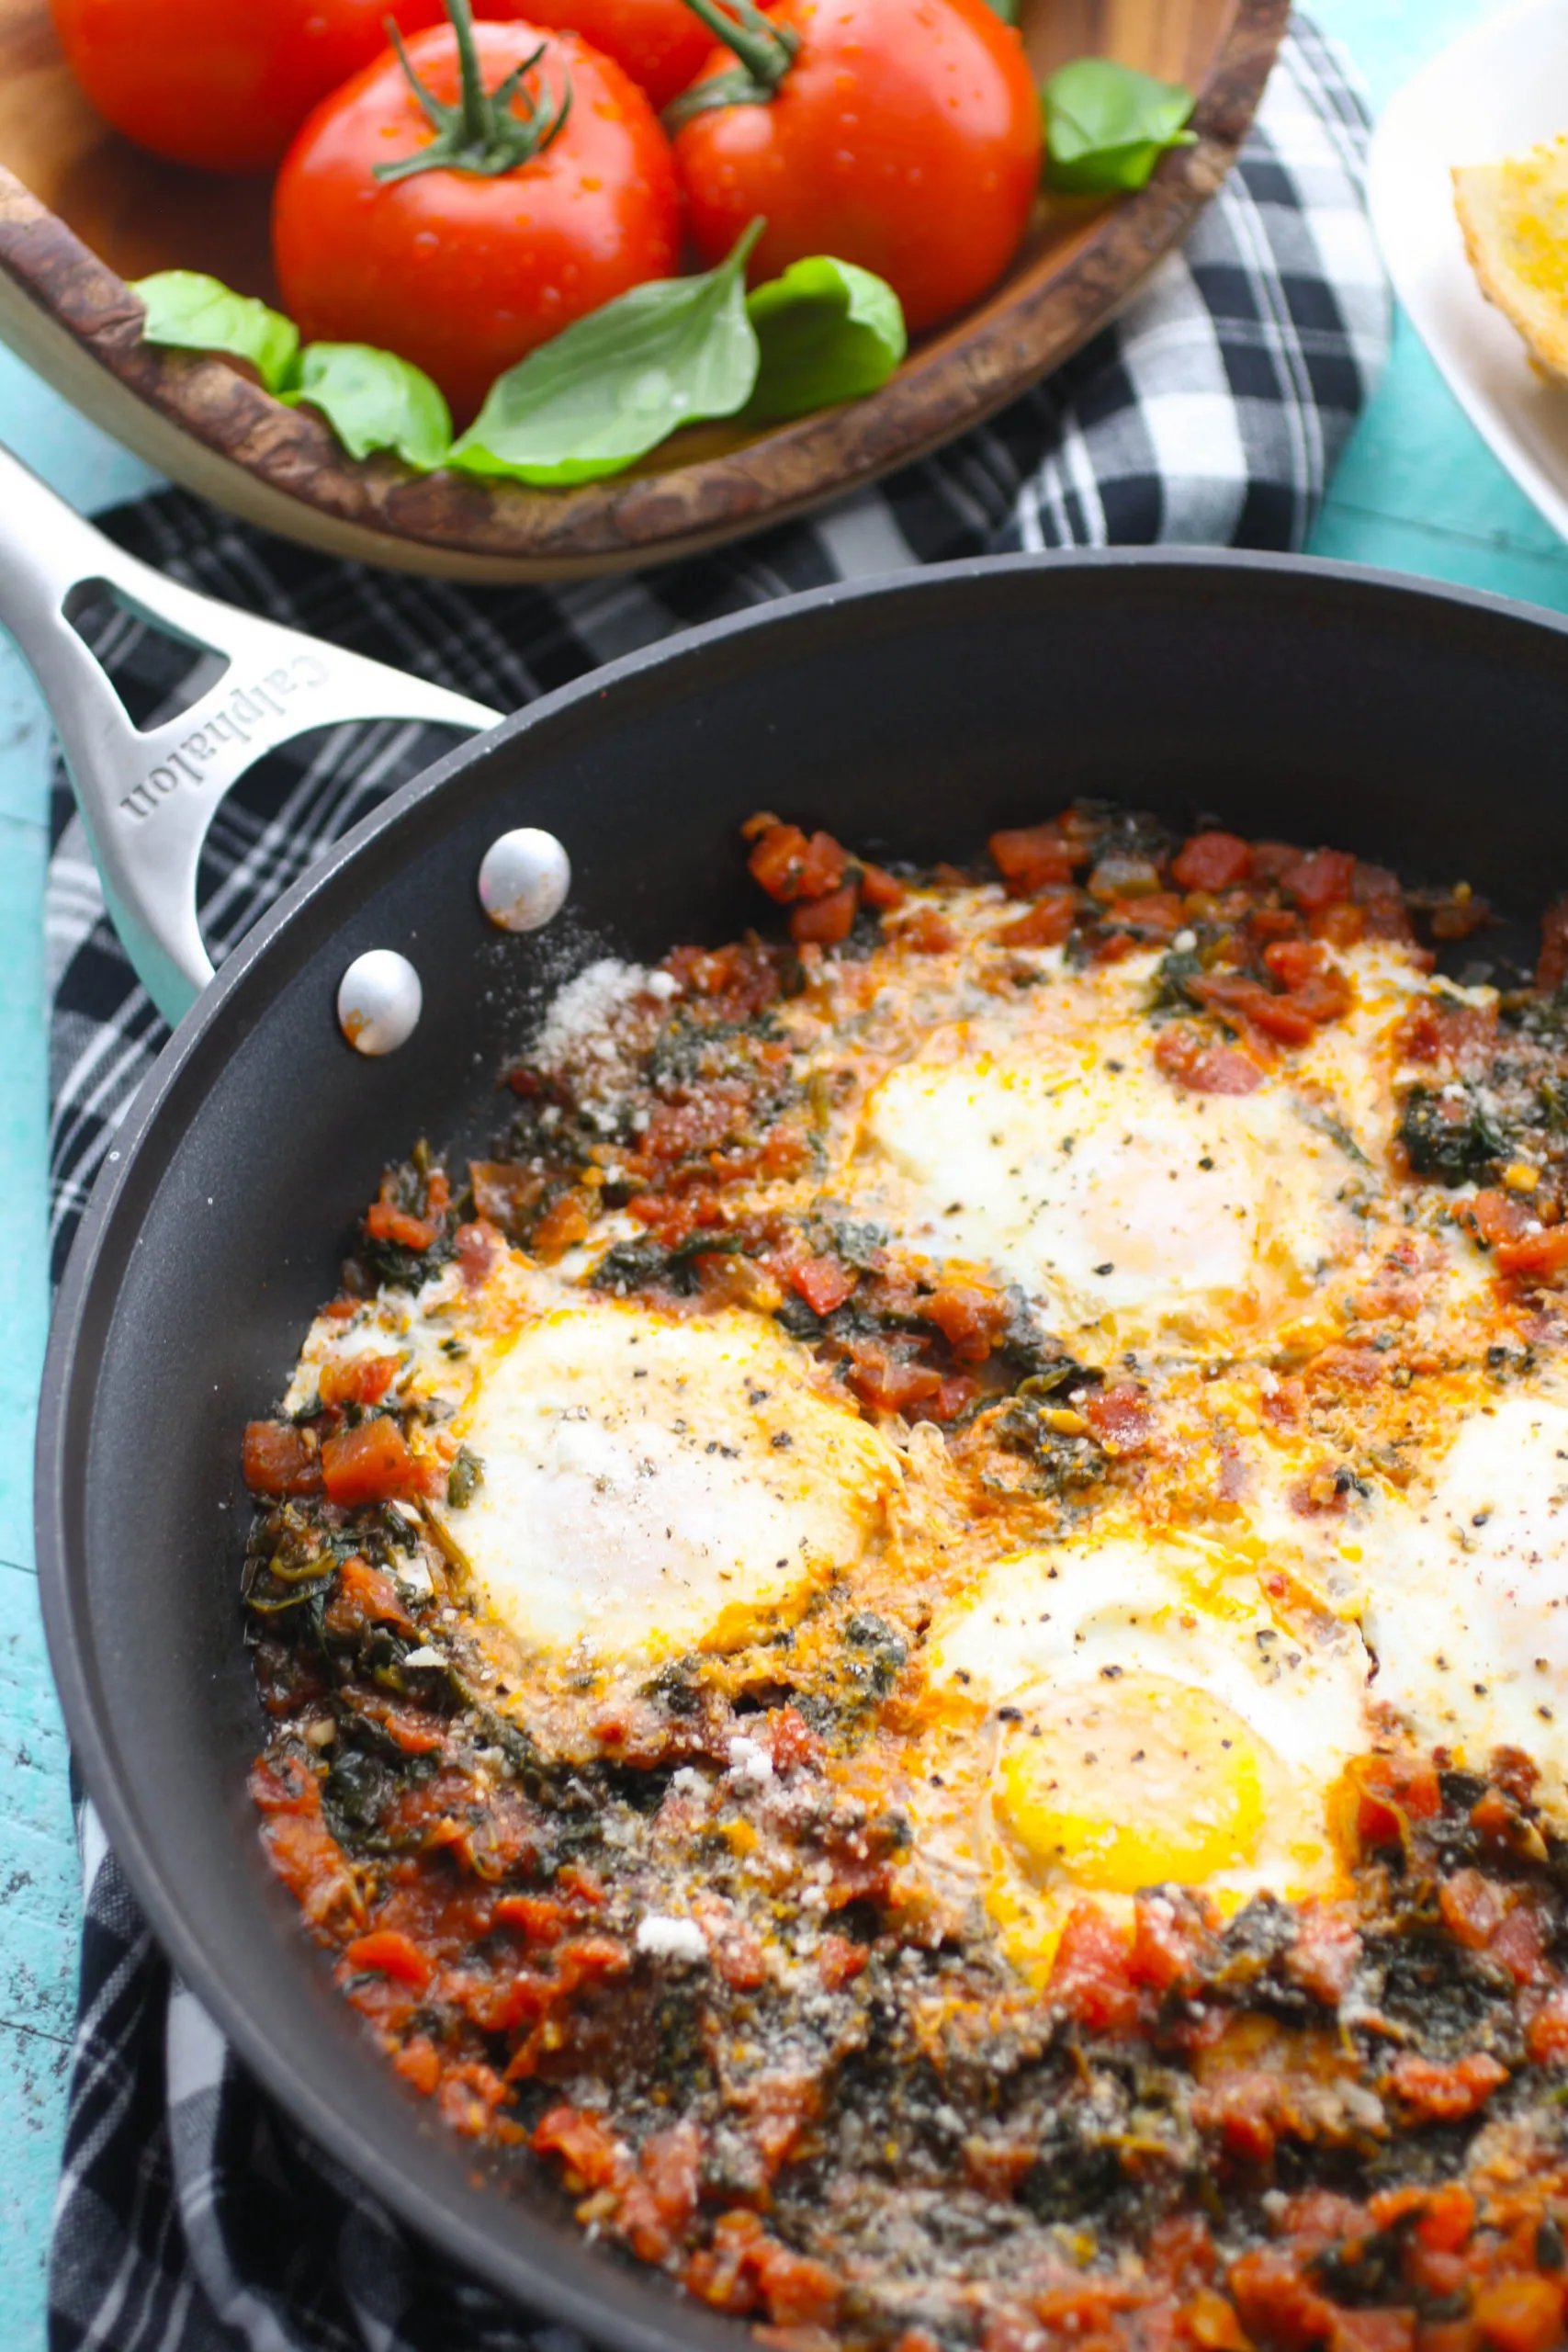 Enjoy Eggs in Purgatory for your next meal.